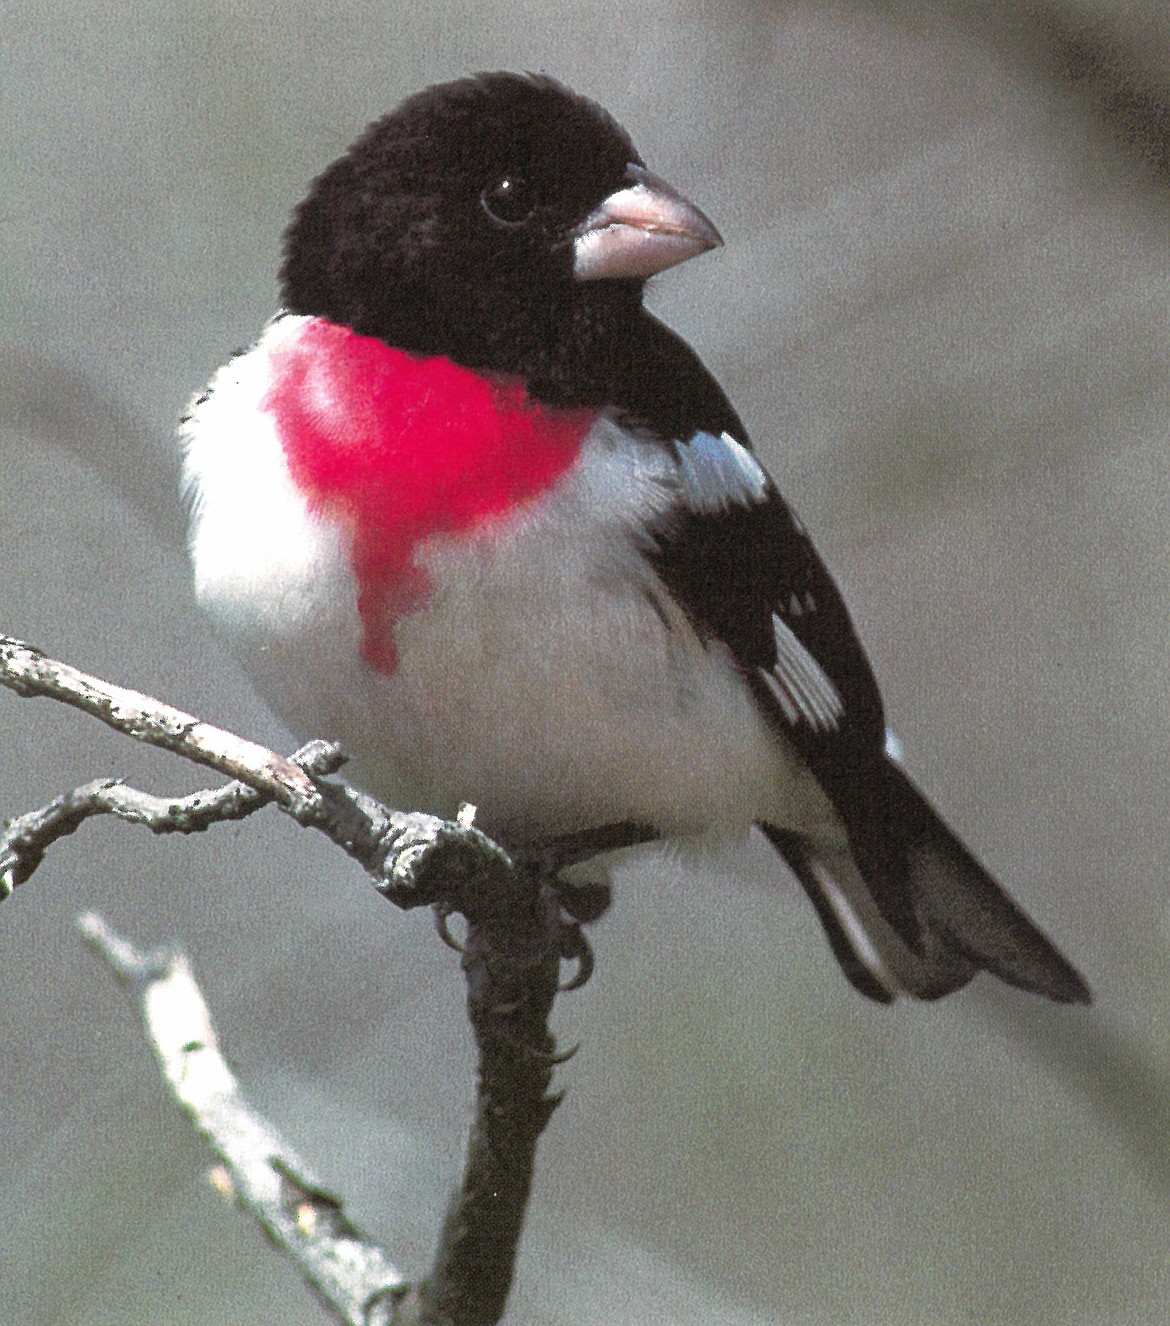 Rose-Breasted Grosbeaks are commonly seen in our area, often “baby-sitting” flocks of smaller Pine Siskins.